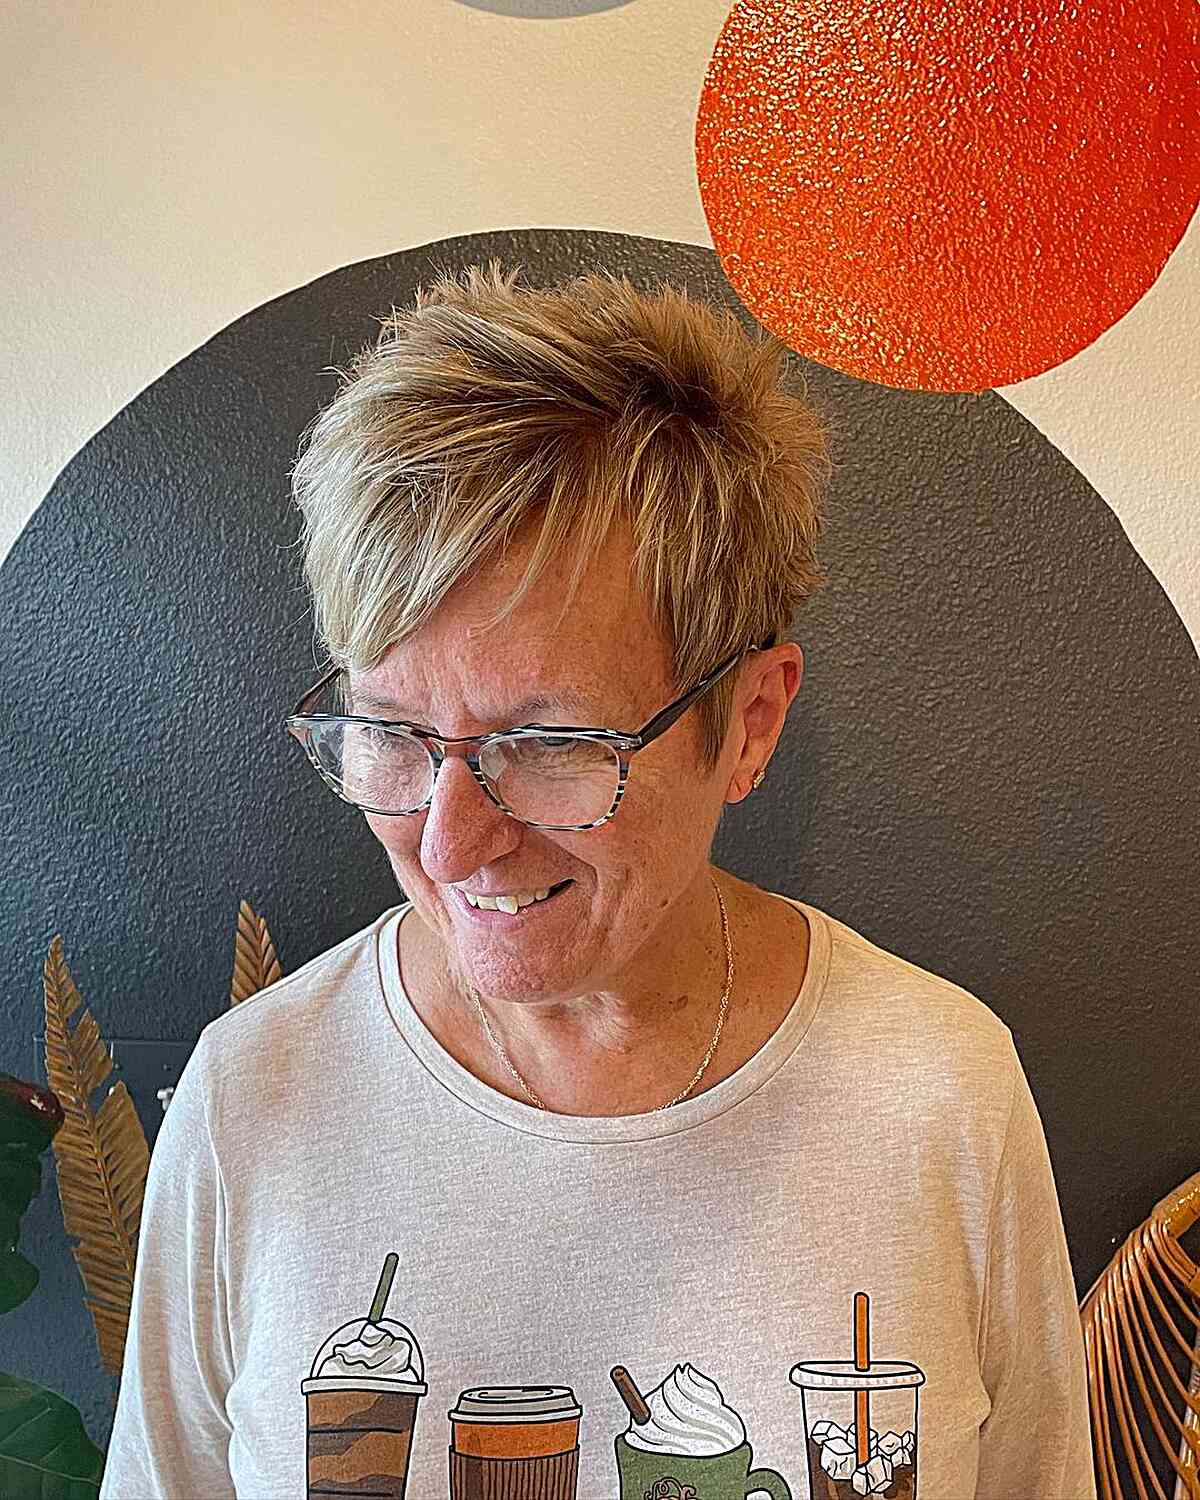 30 Perfect Pixie Cuts for Women Over 60 With Glasses